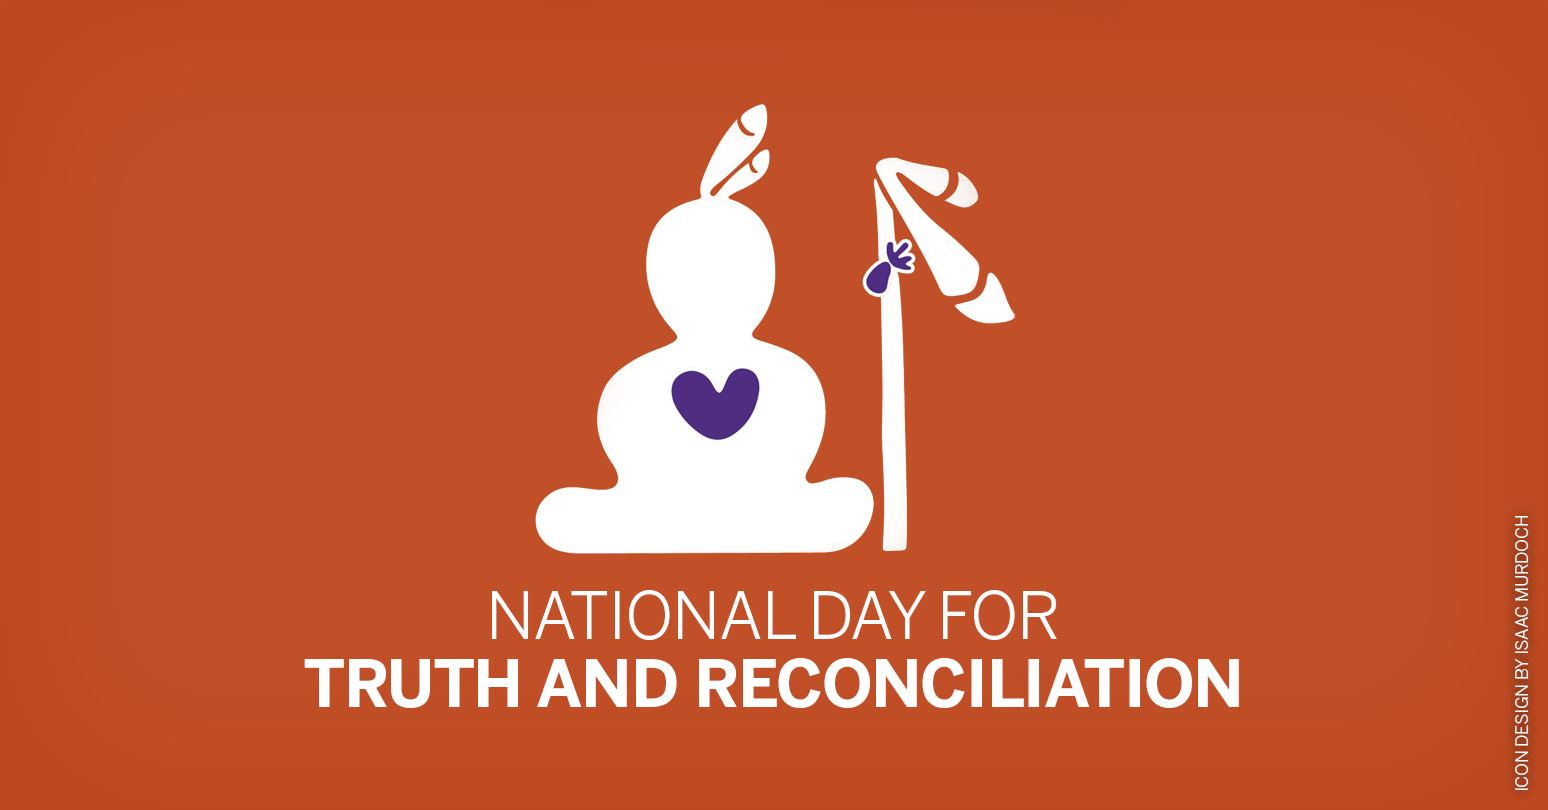 Ivey recognizes the National Day for Truth and Reconciliation